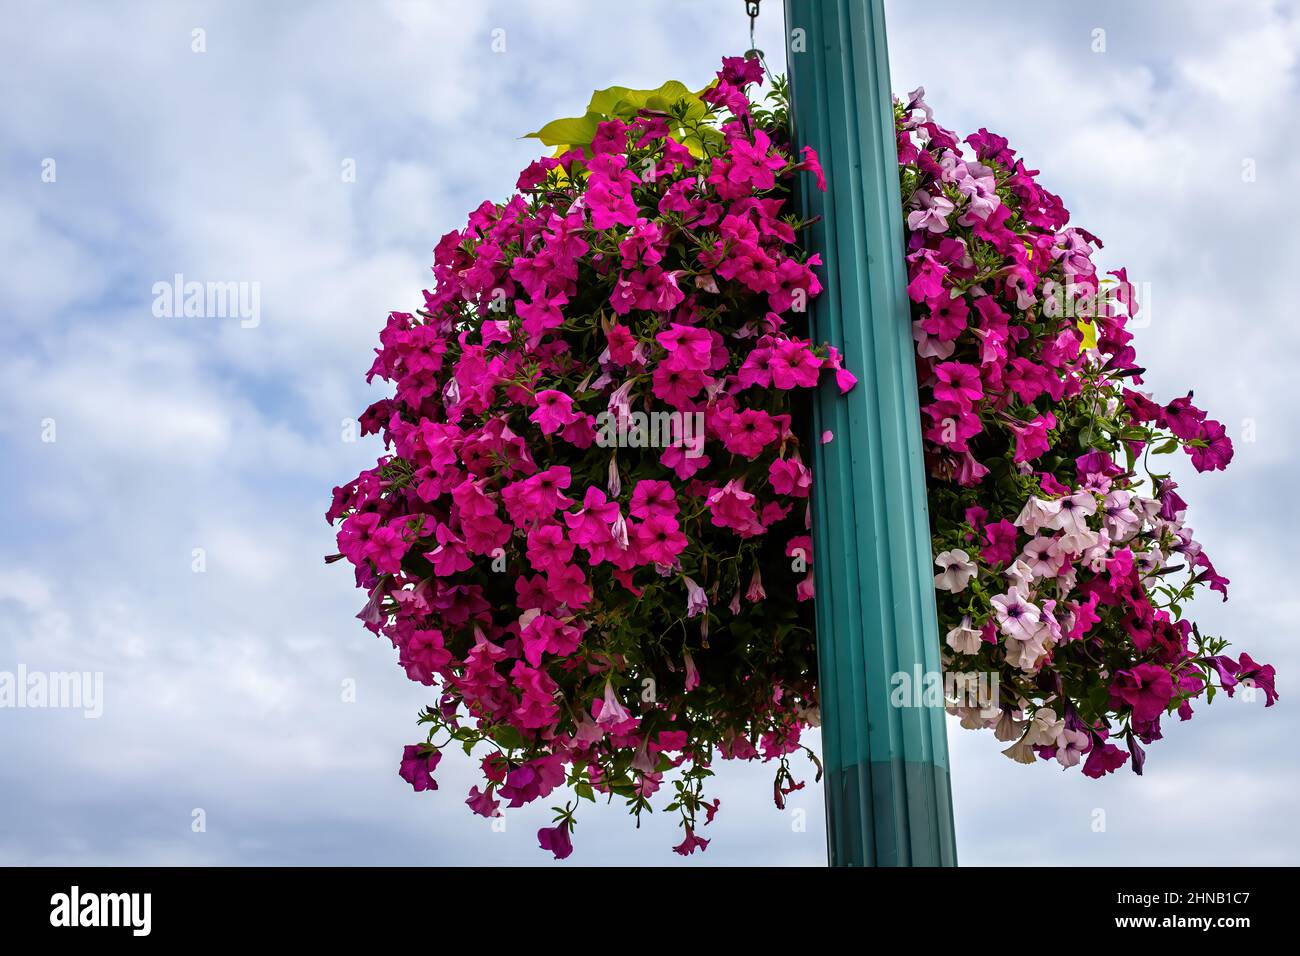 Town's basket of pink petunias hanging from a lamppost. Stock Photo